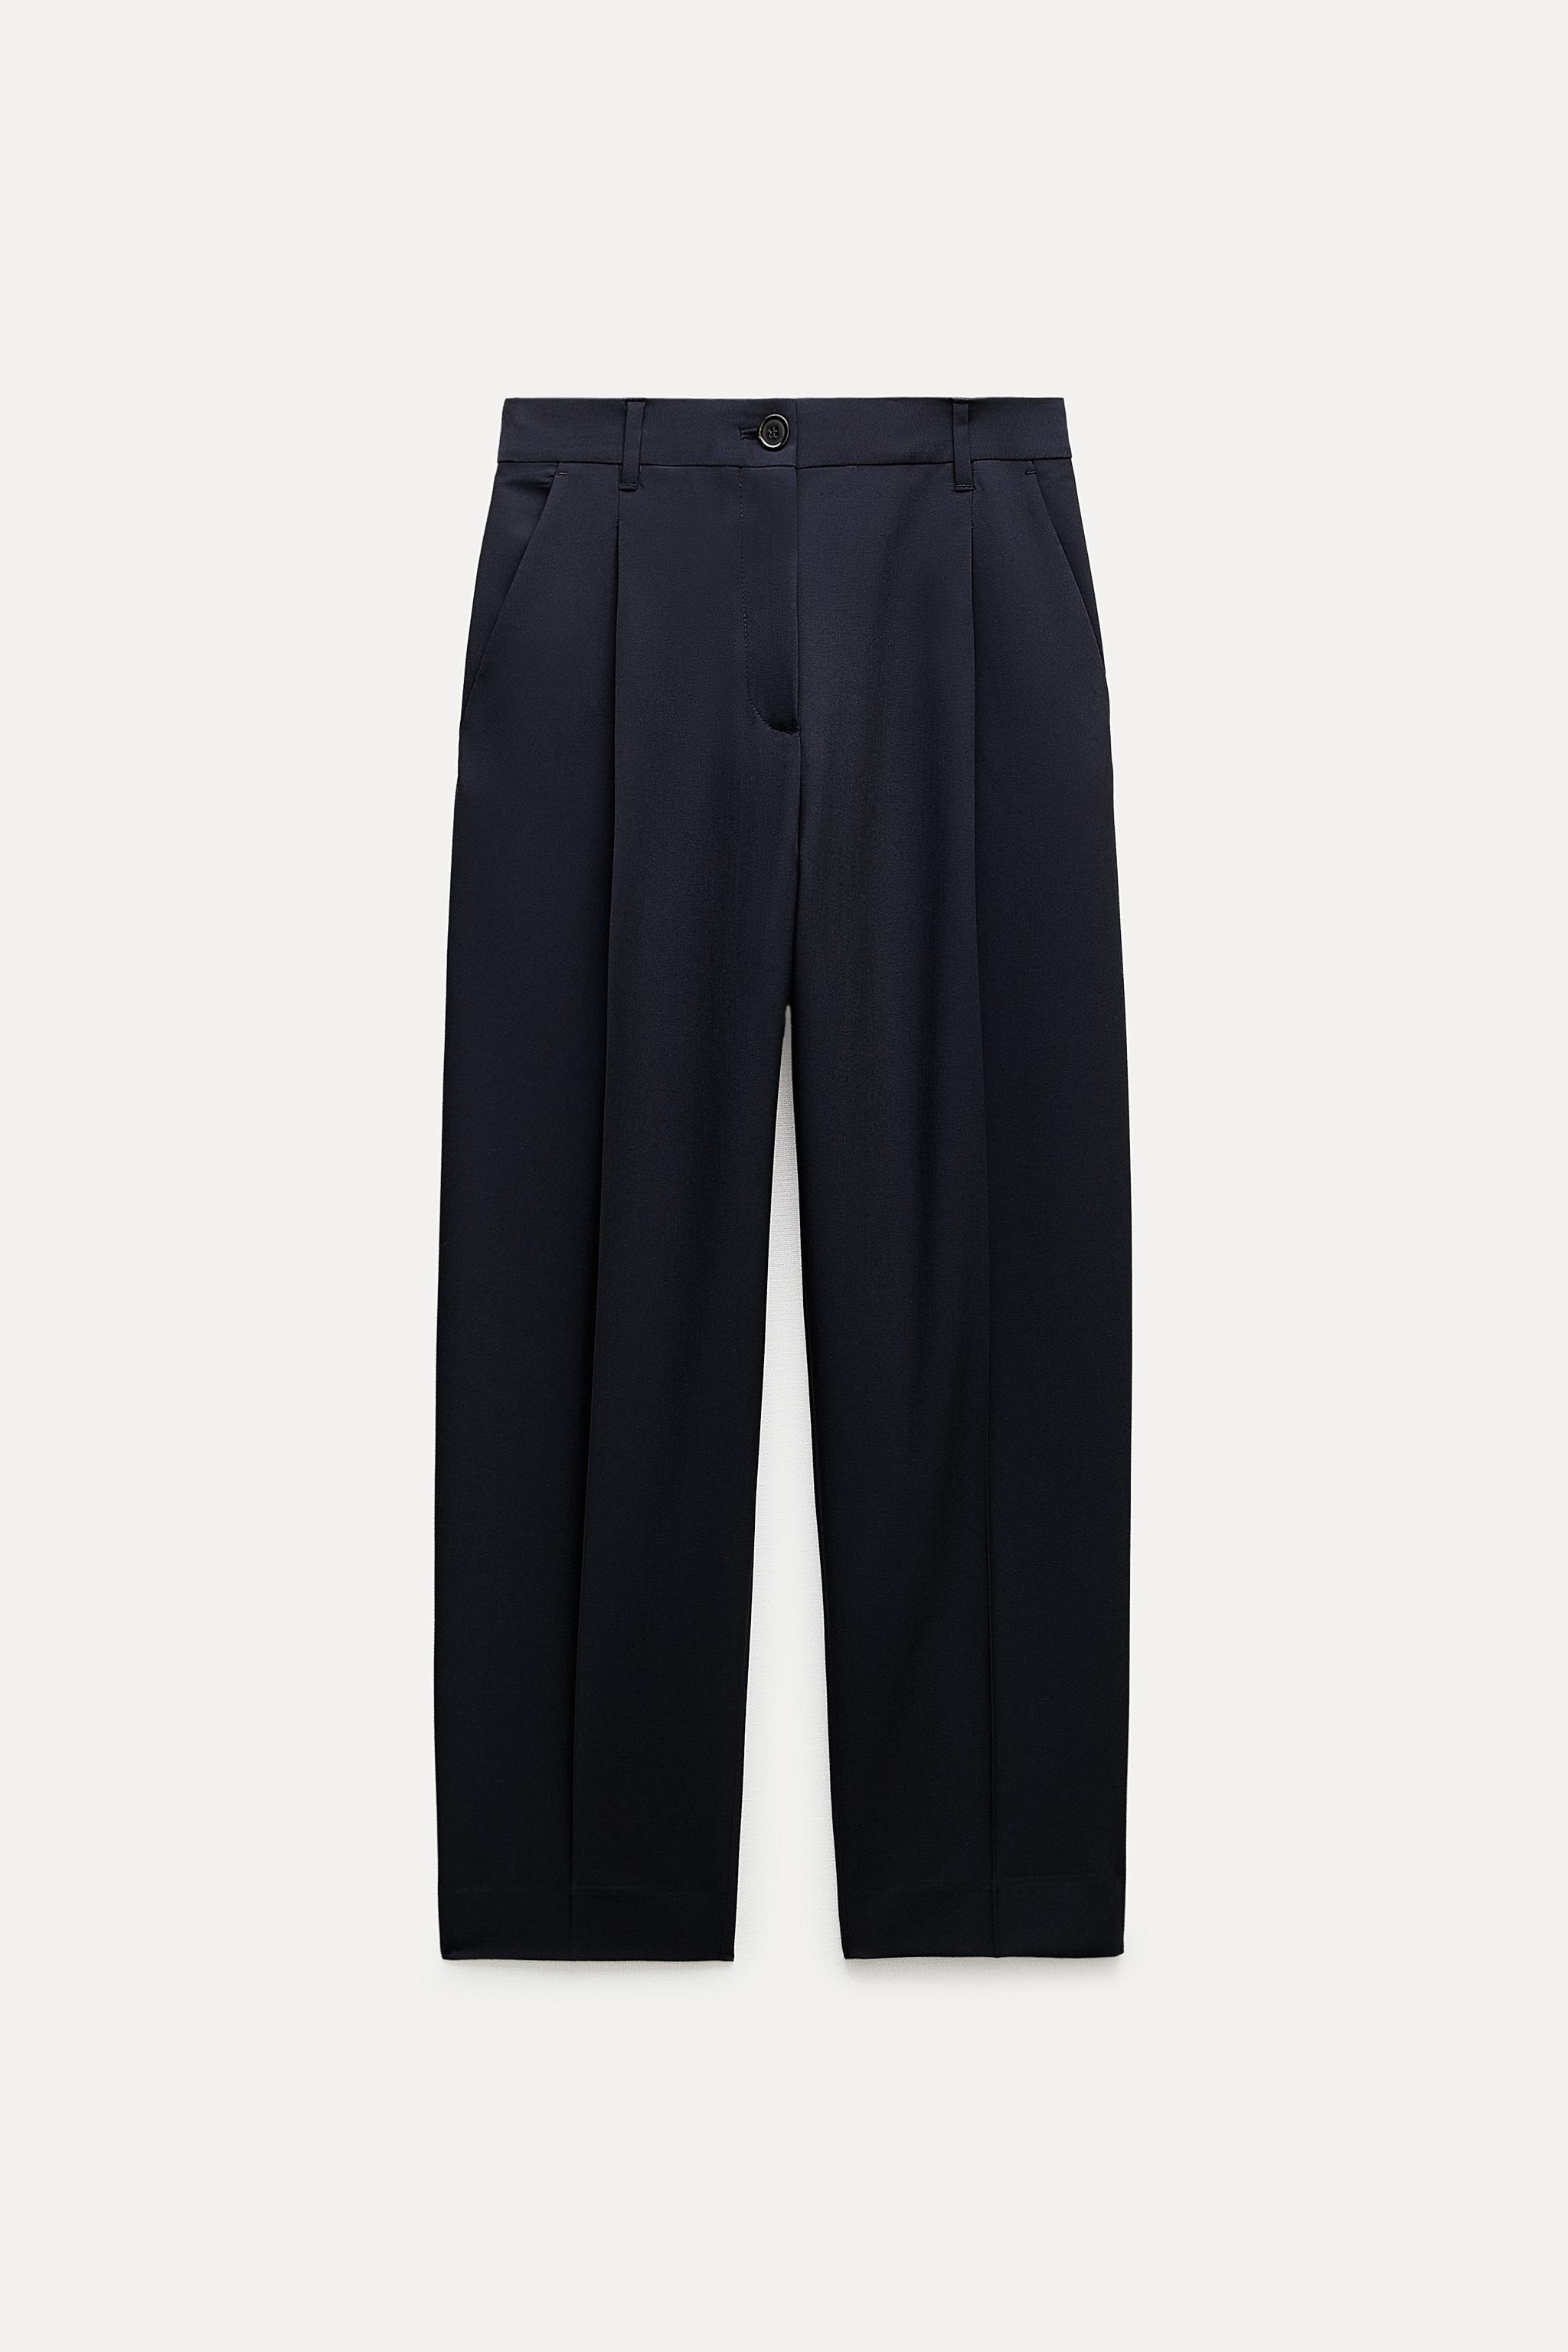 Zara Women Pleated Pants - Navy Blue Small Size 28, Women's Fashion,  Bottoms, Other Bottoms on Carousell